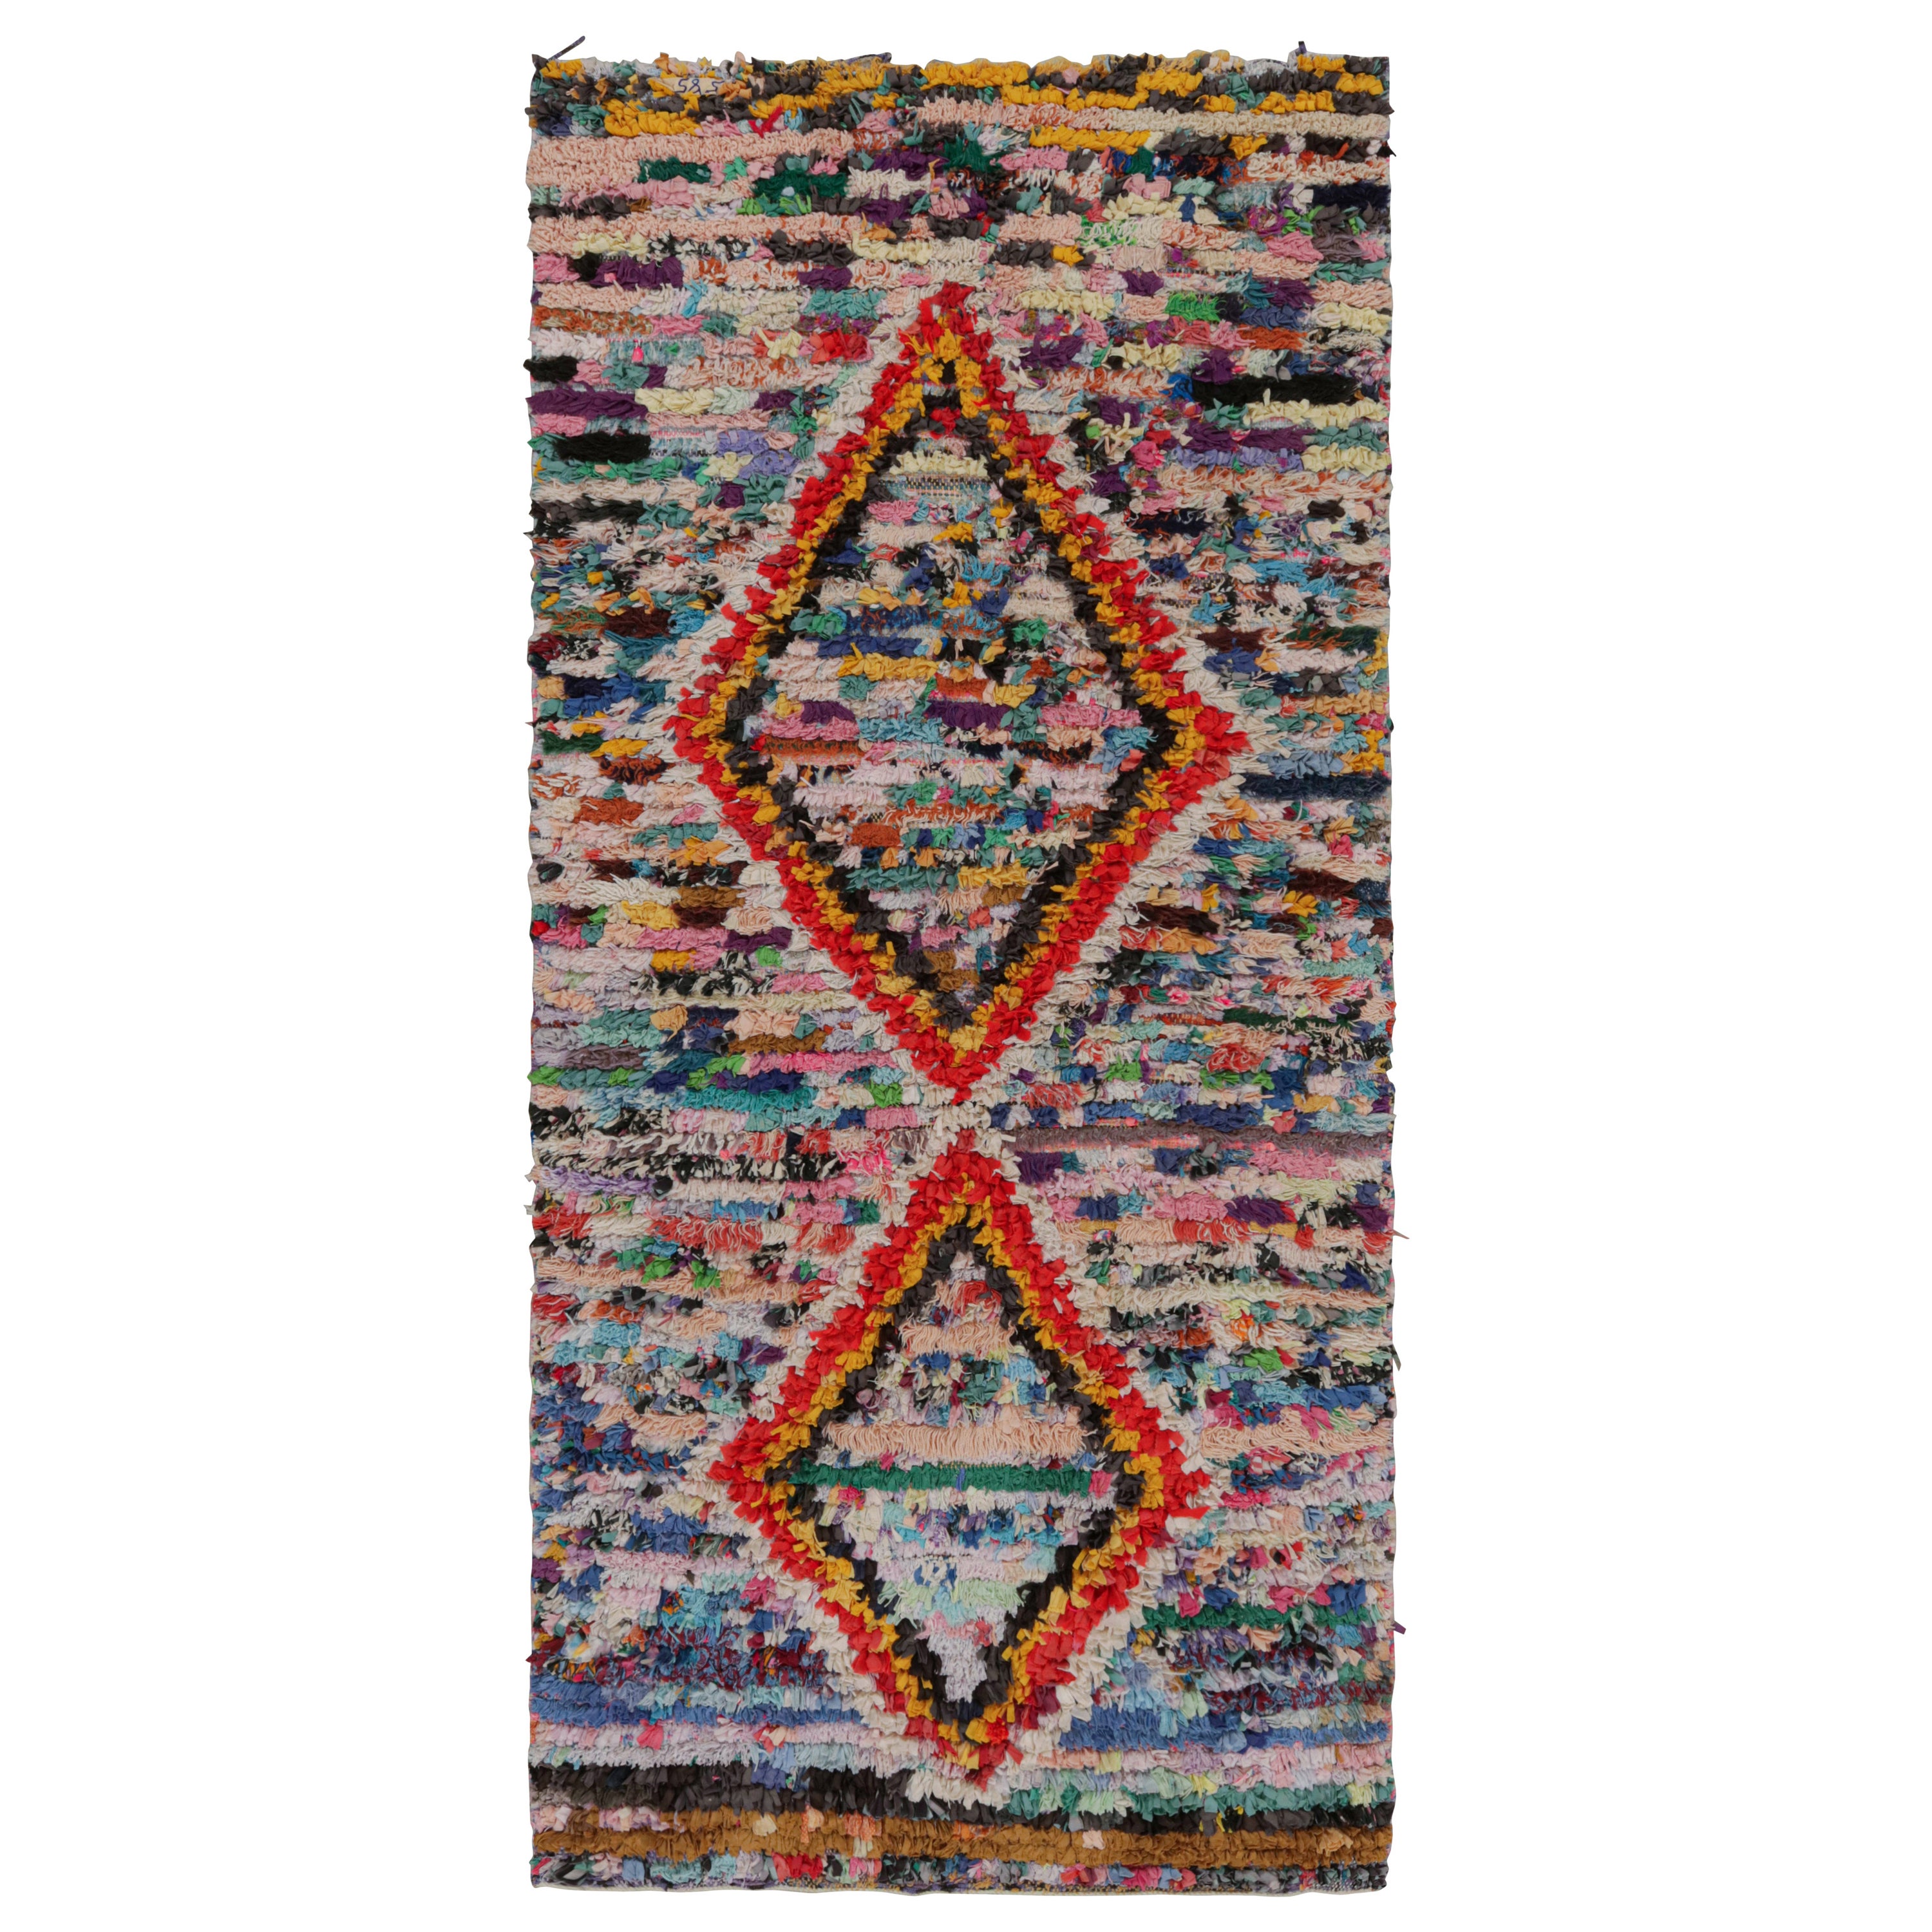 1950s Azilal Moroccan Runner rug with Polychromatic Patterns by Rug & Kilim